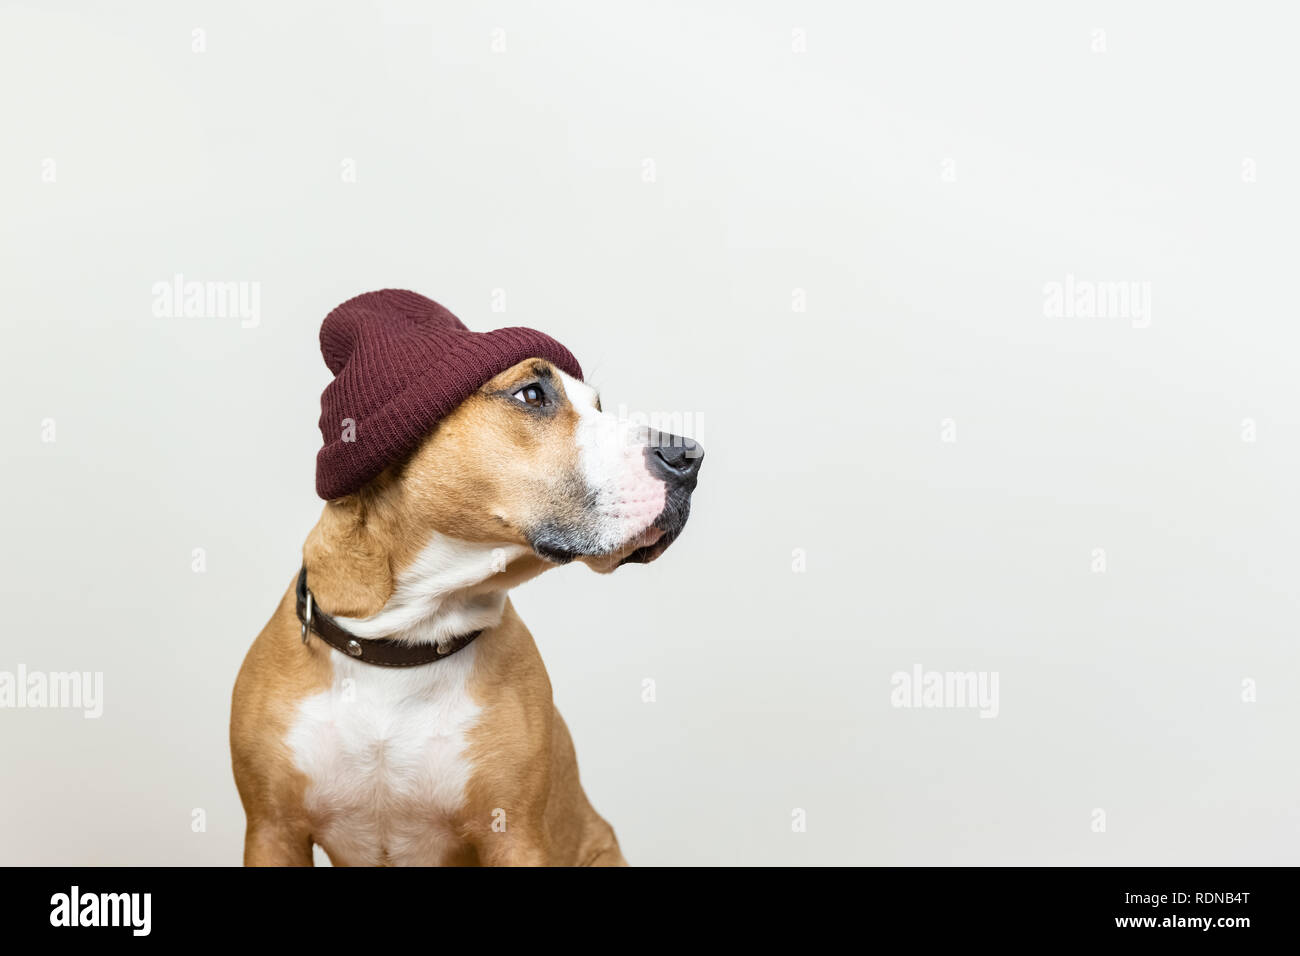 Funny dog in red hipster knit hat. Staffordshire terrier looks at copy space, winter accessories or seasonal concept Stock Photo